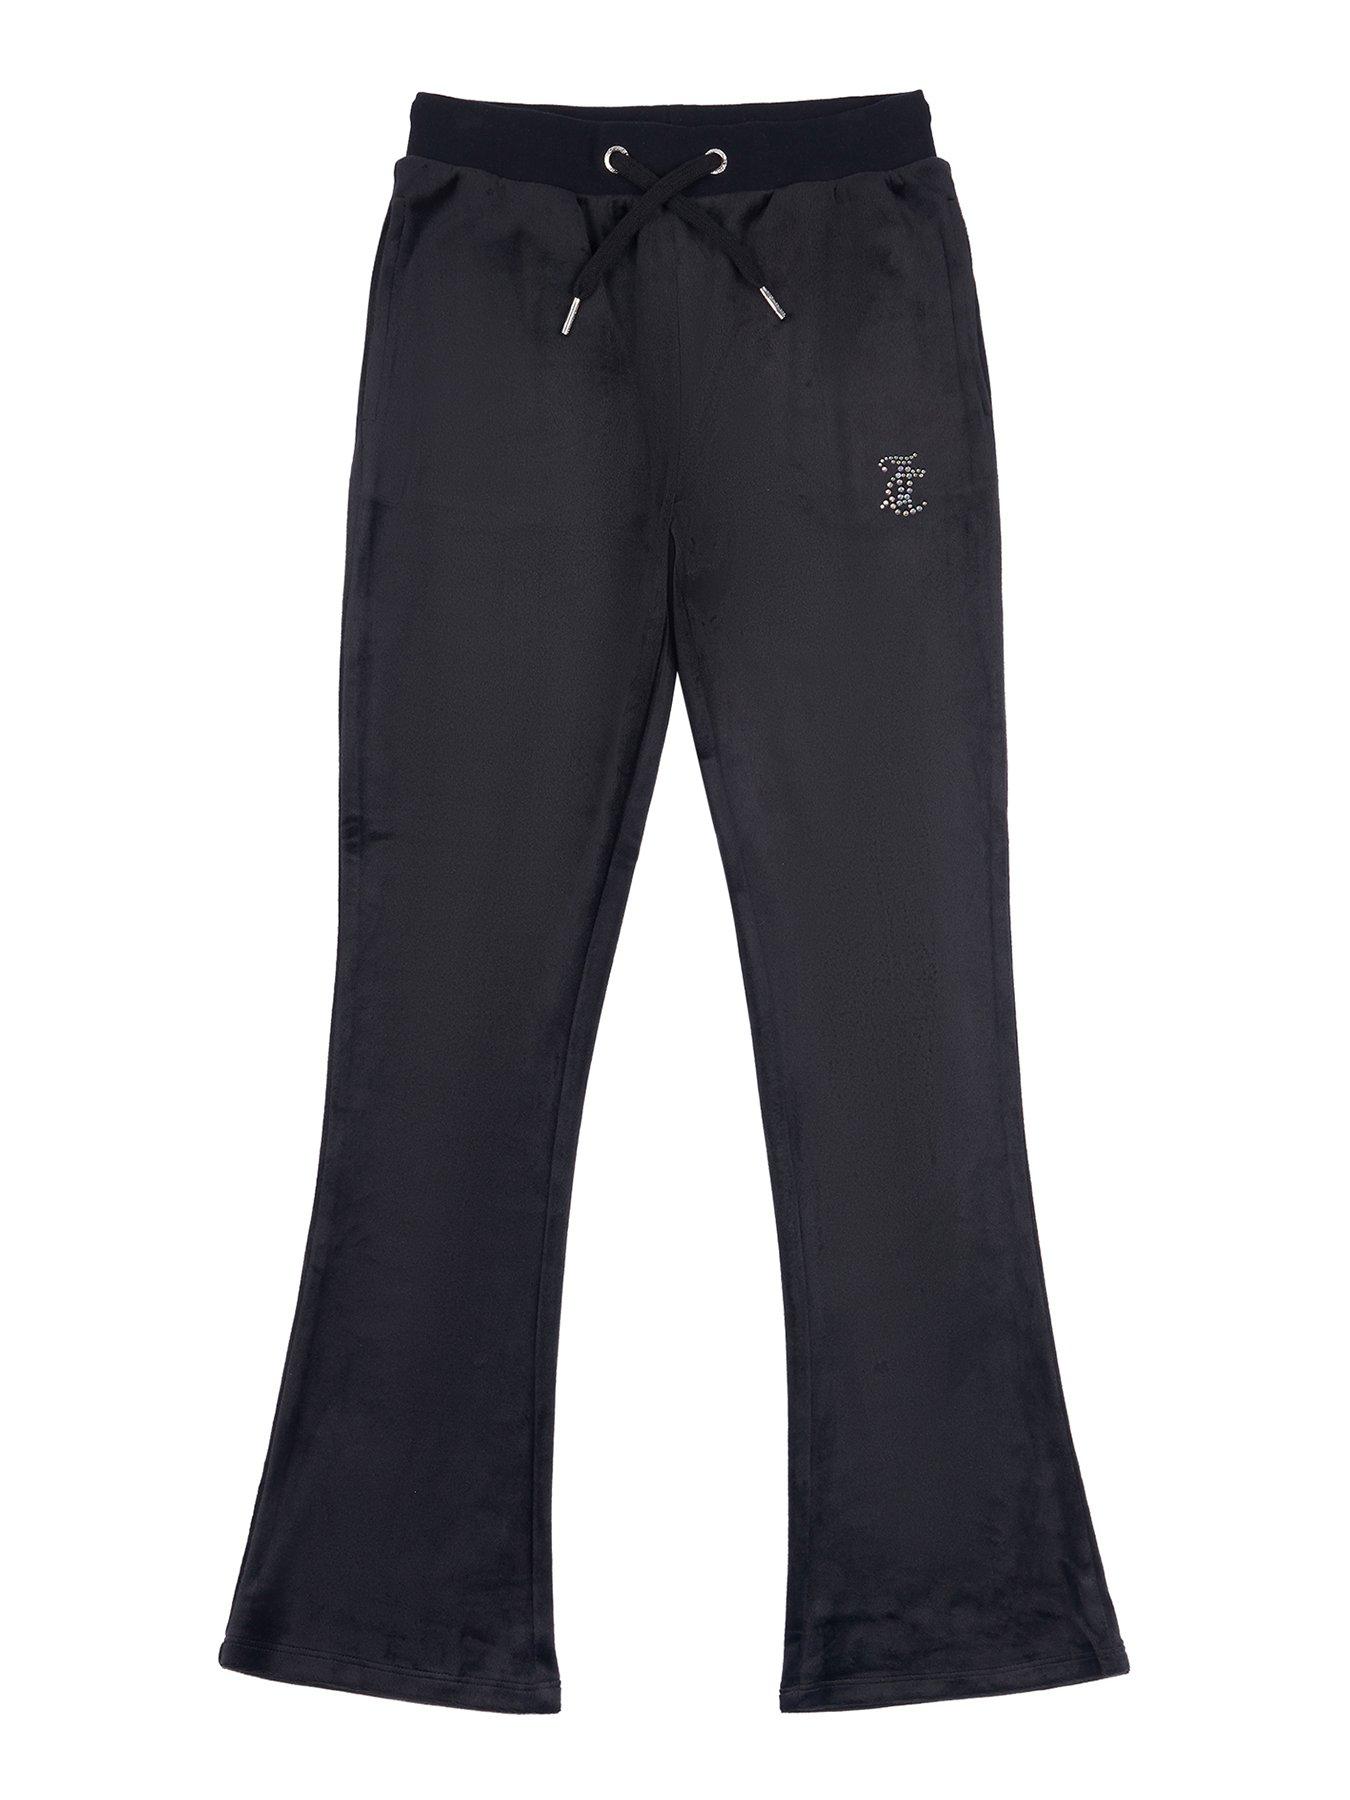 Sale  Juicy Couture Kids Velour Bootcut Sweatpants (7-16 Years